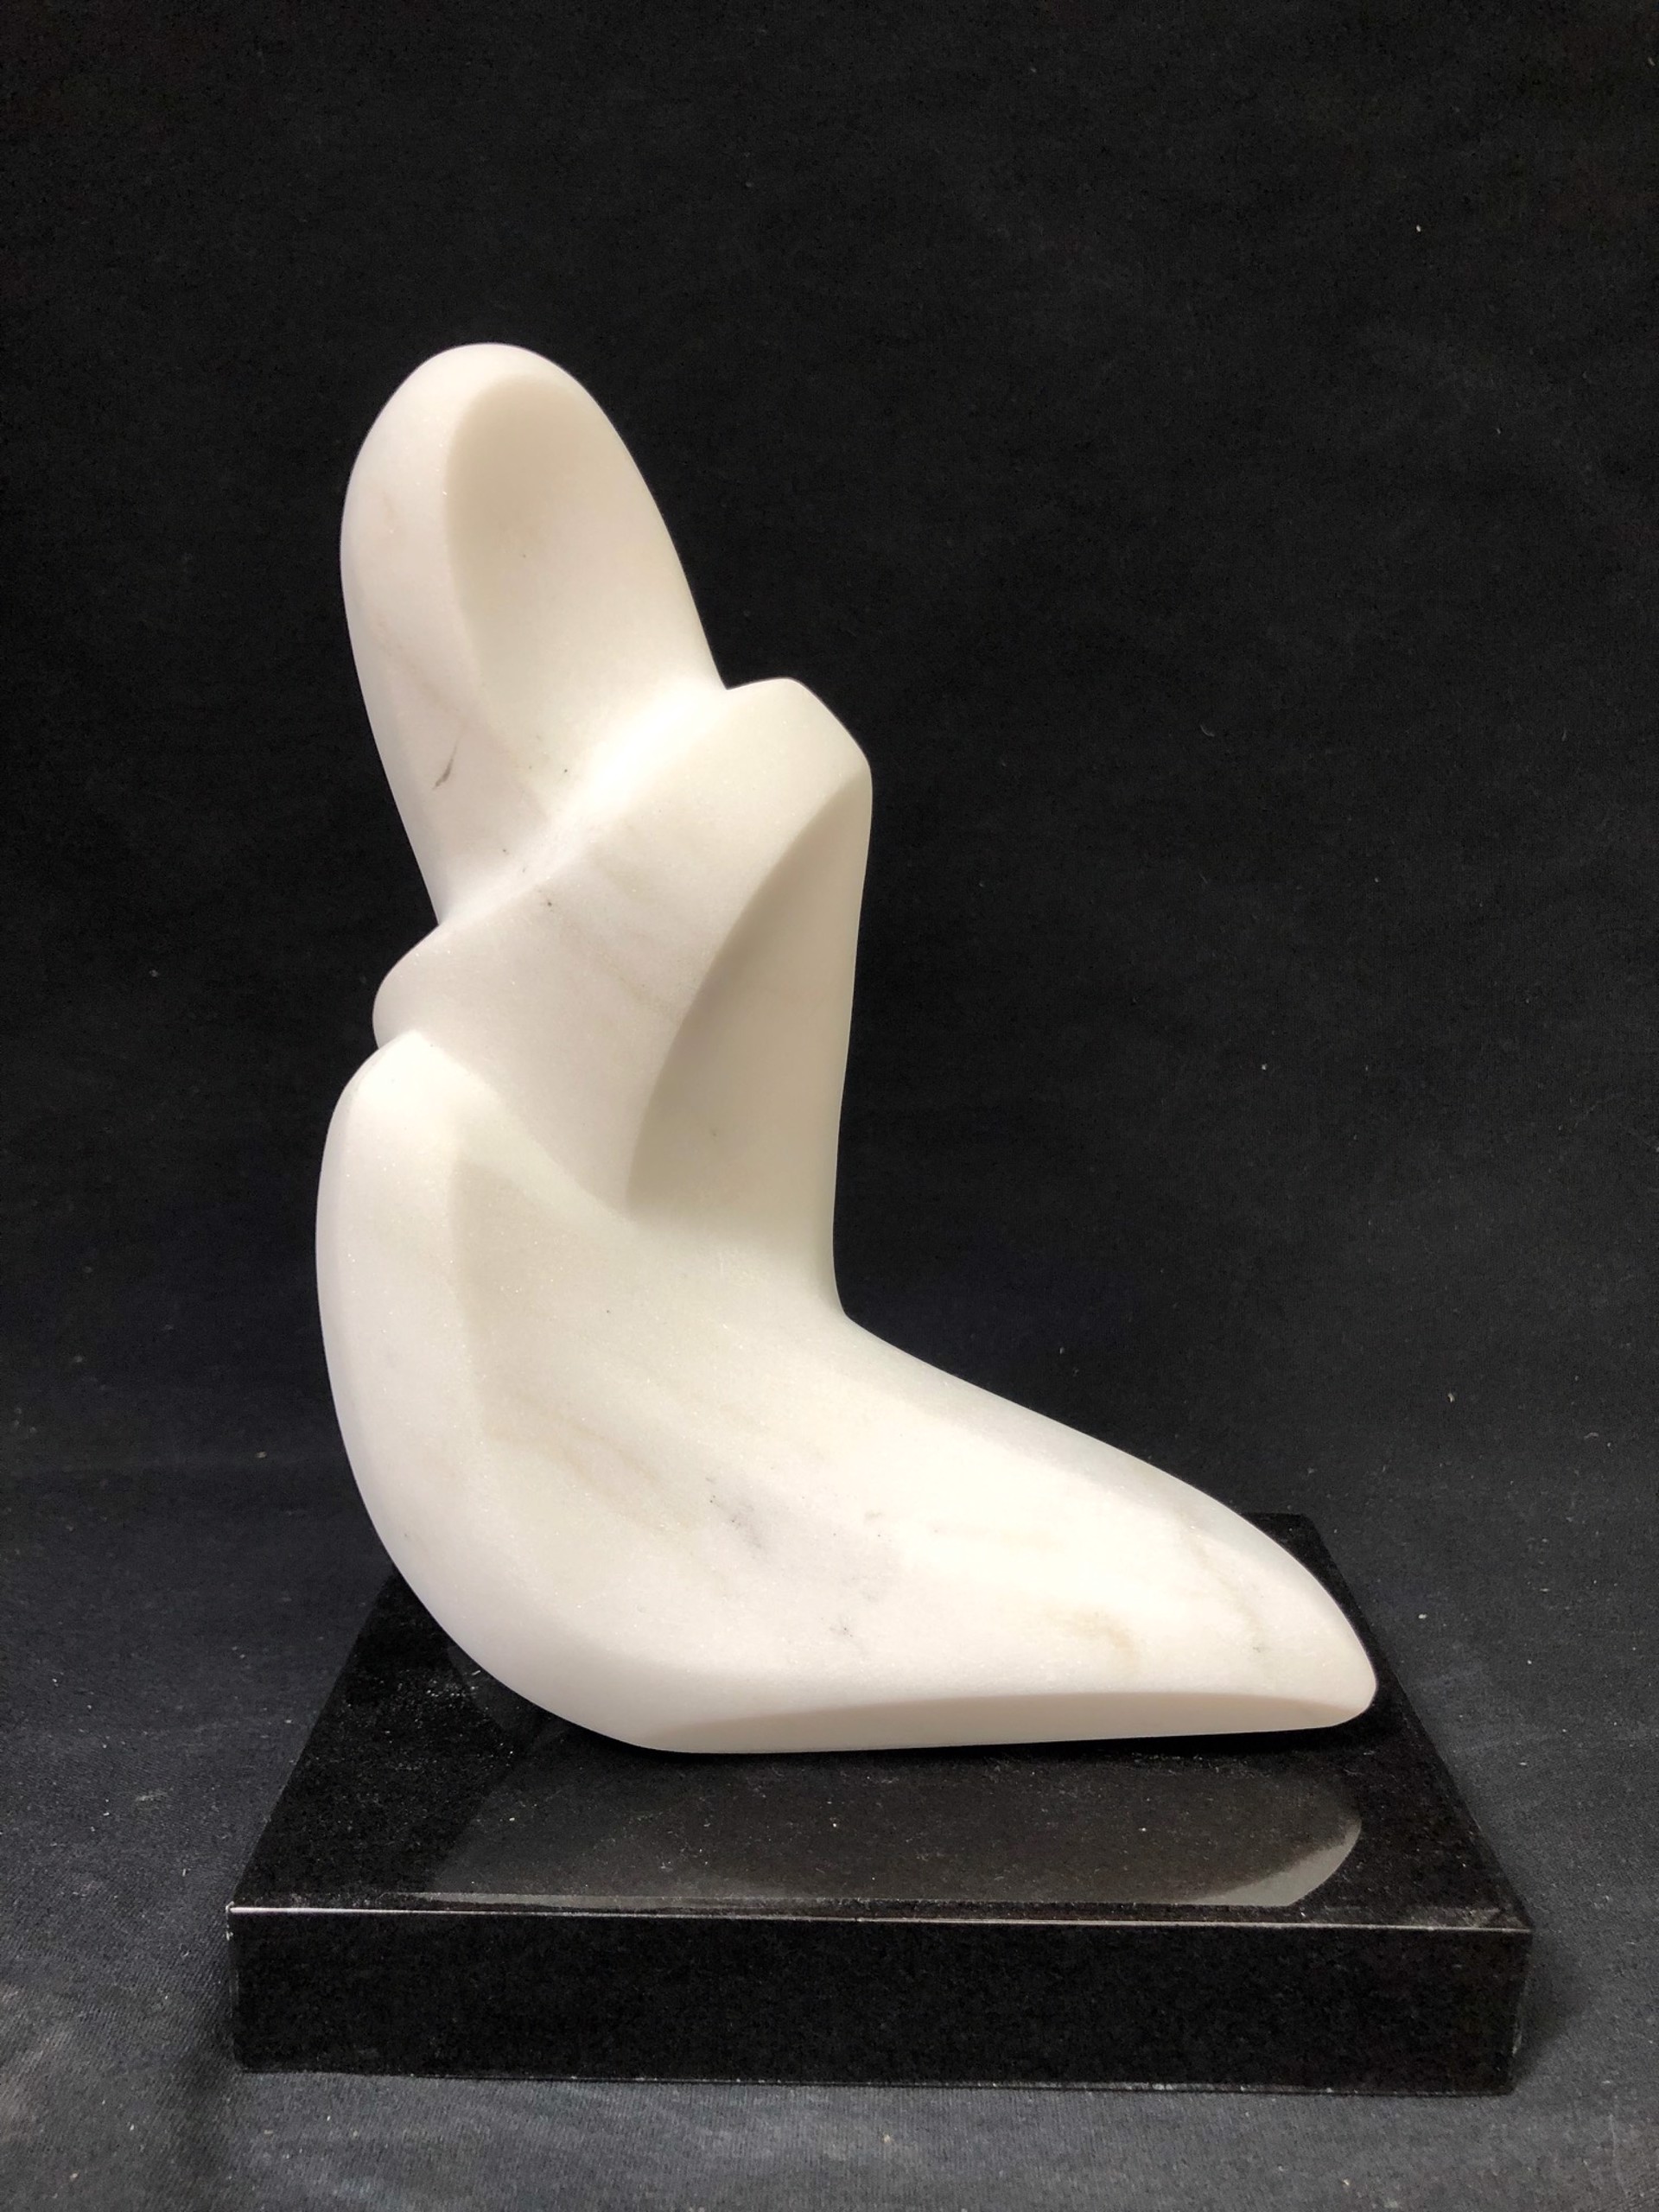 Seated Figure 3 (Maquette) by Steven Lustig